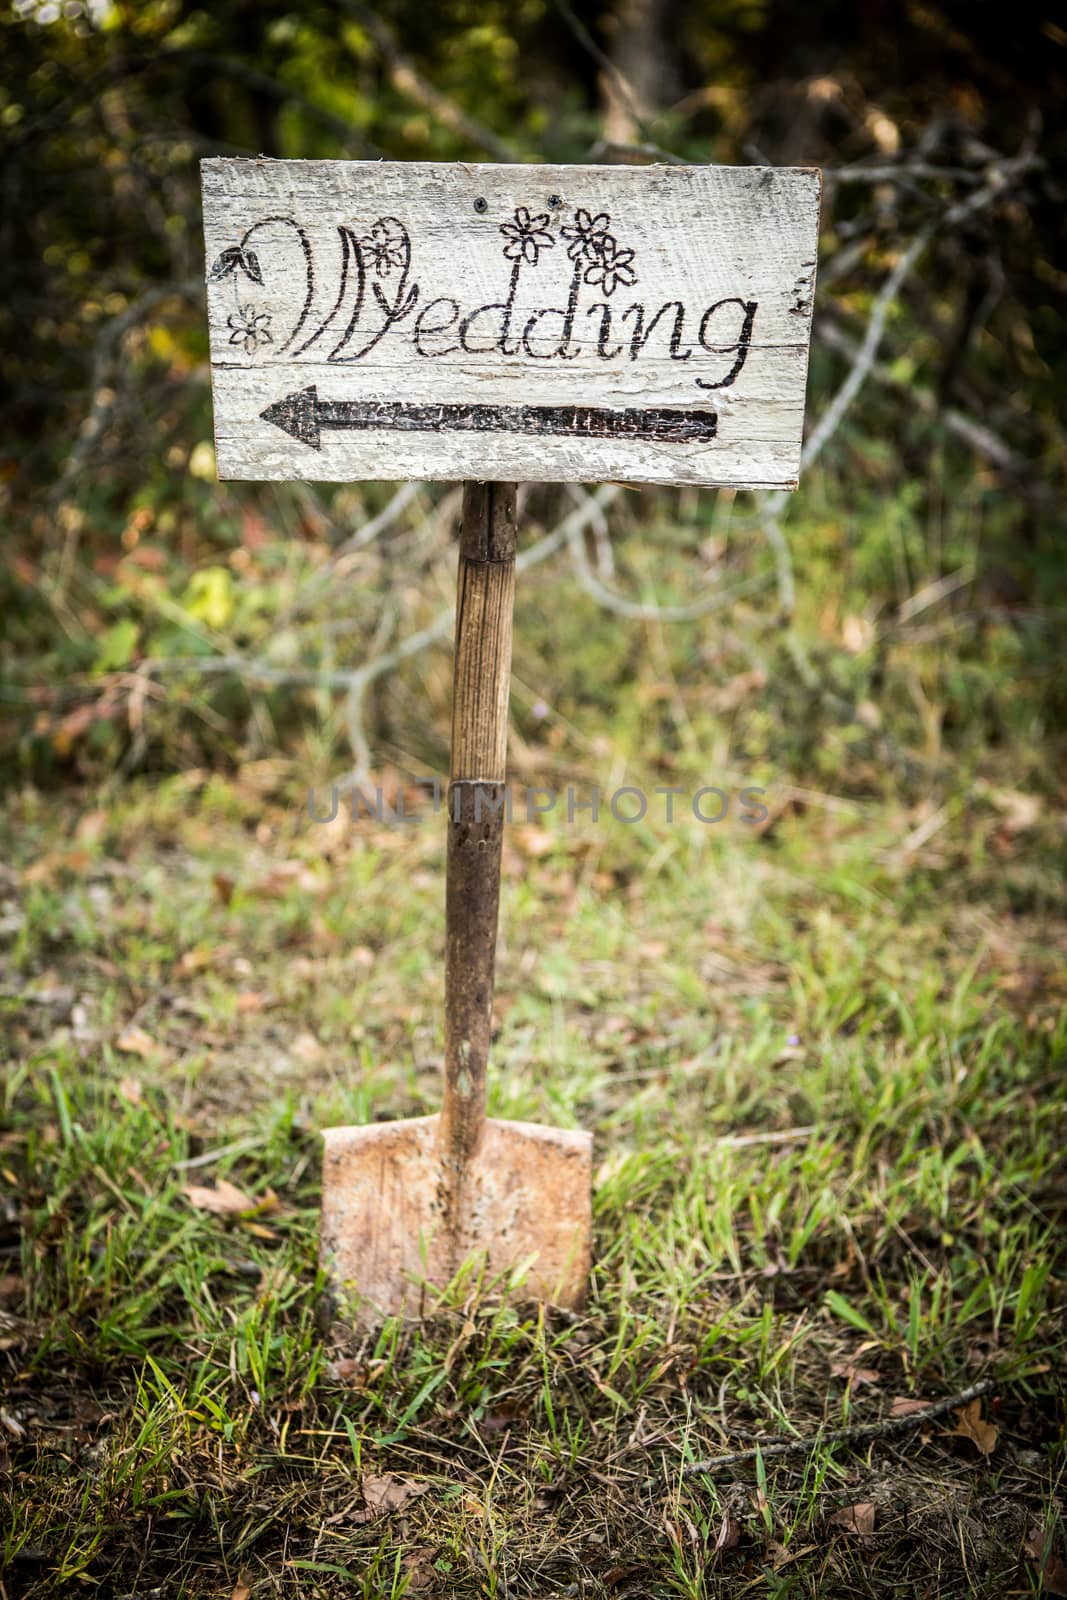 Homemade rustic wedding sign placed on a shovel in the woods. Arrow points right.